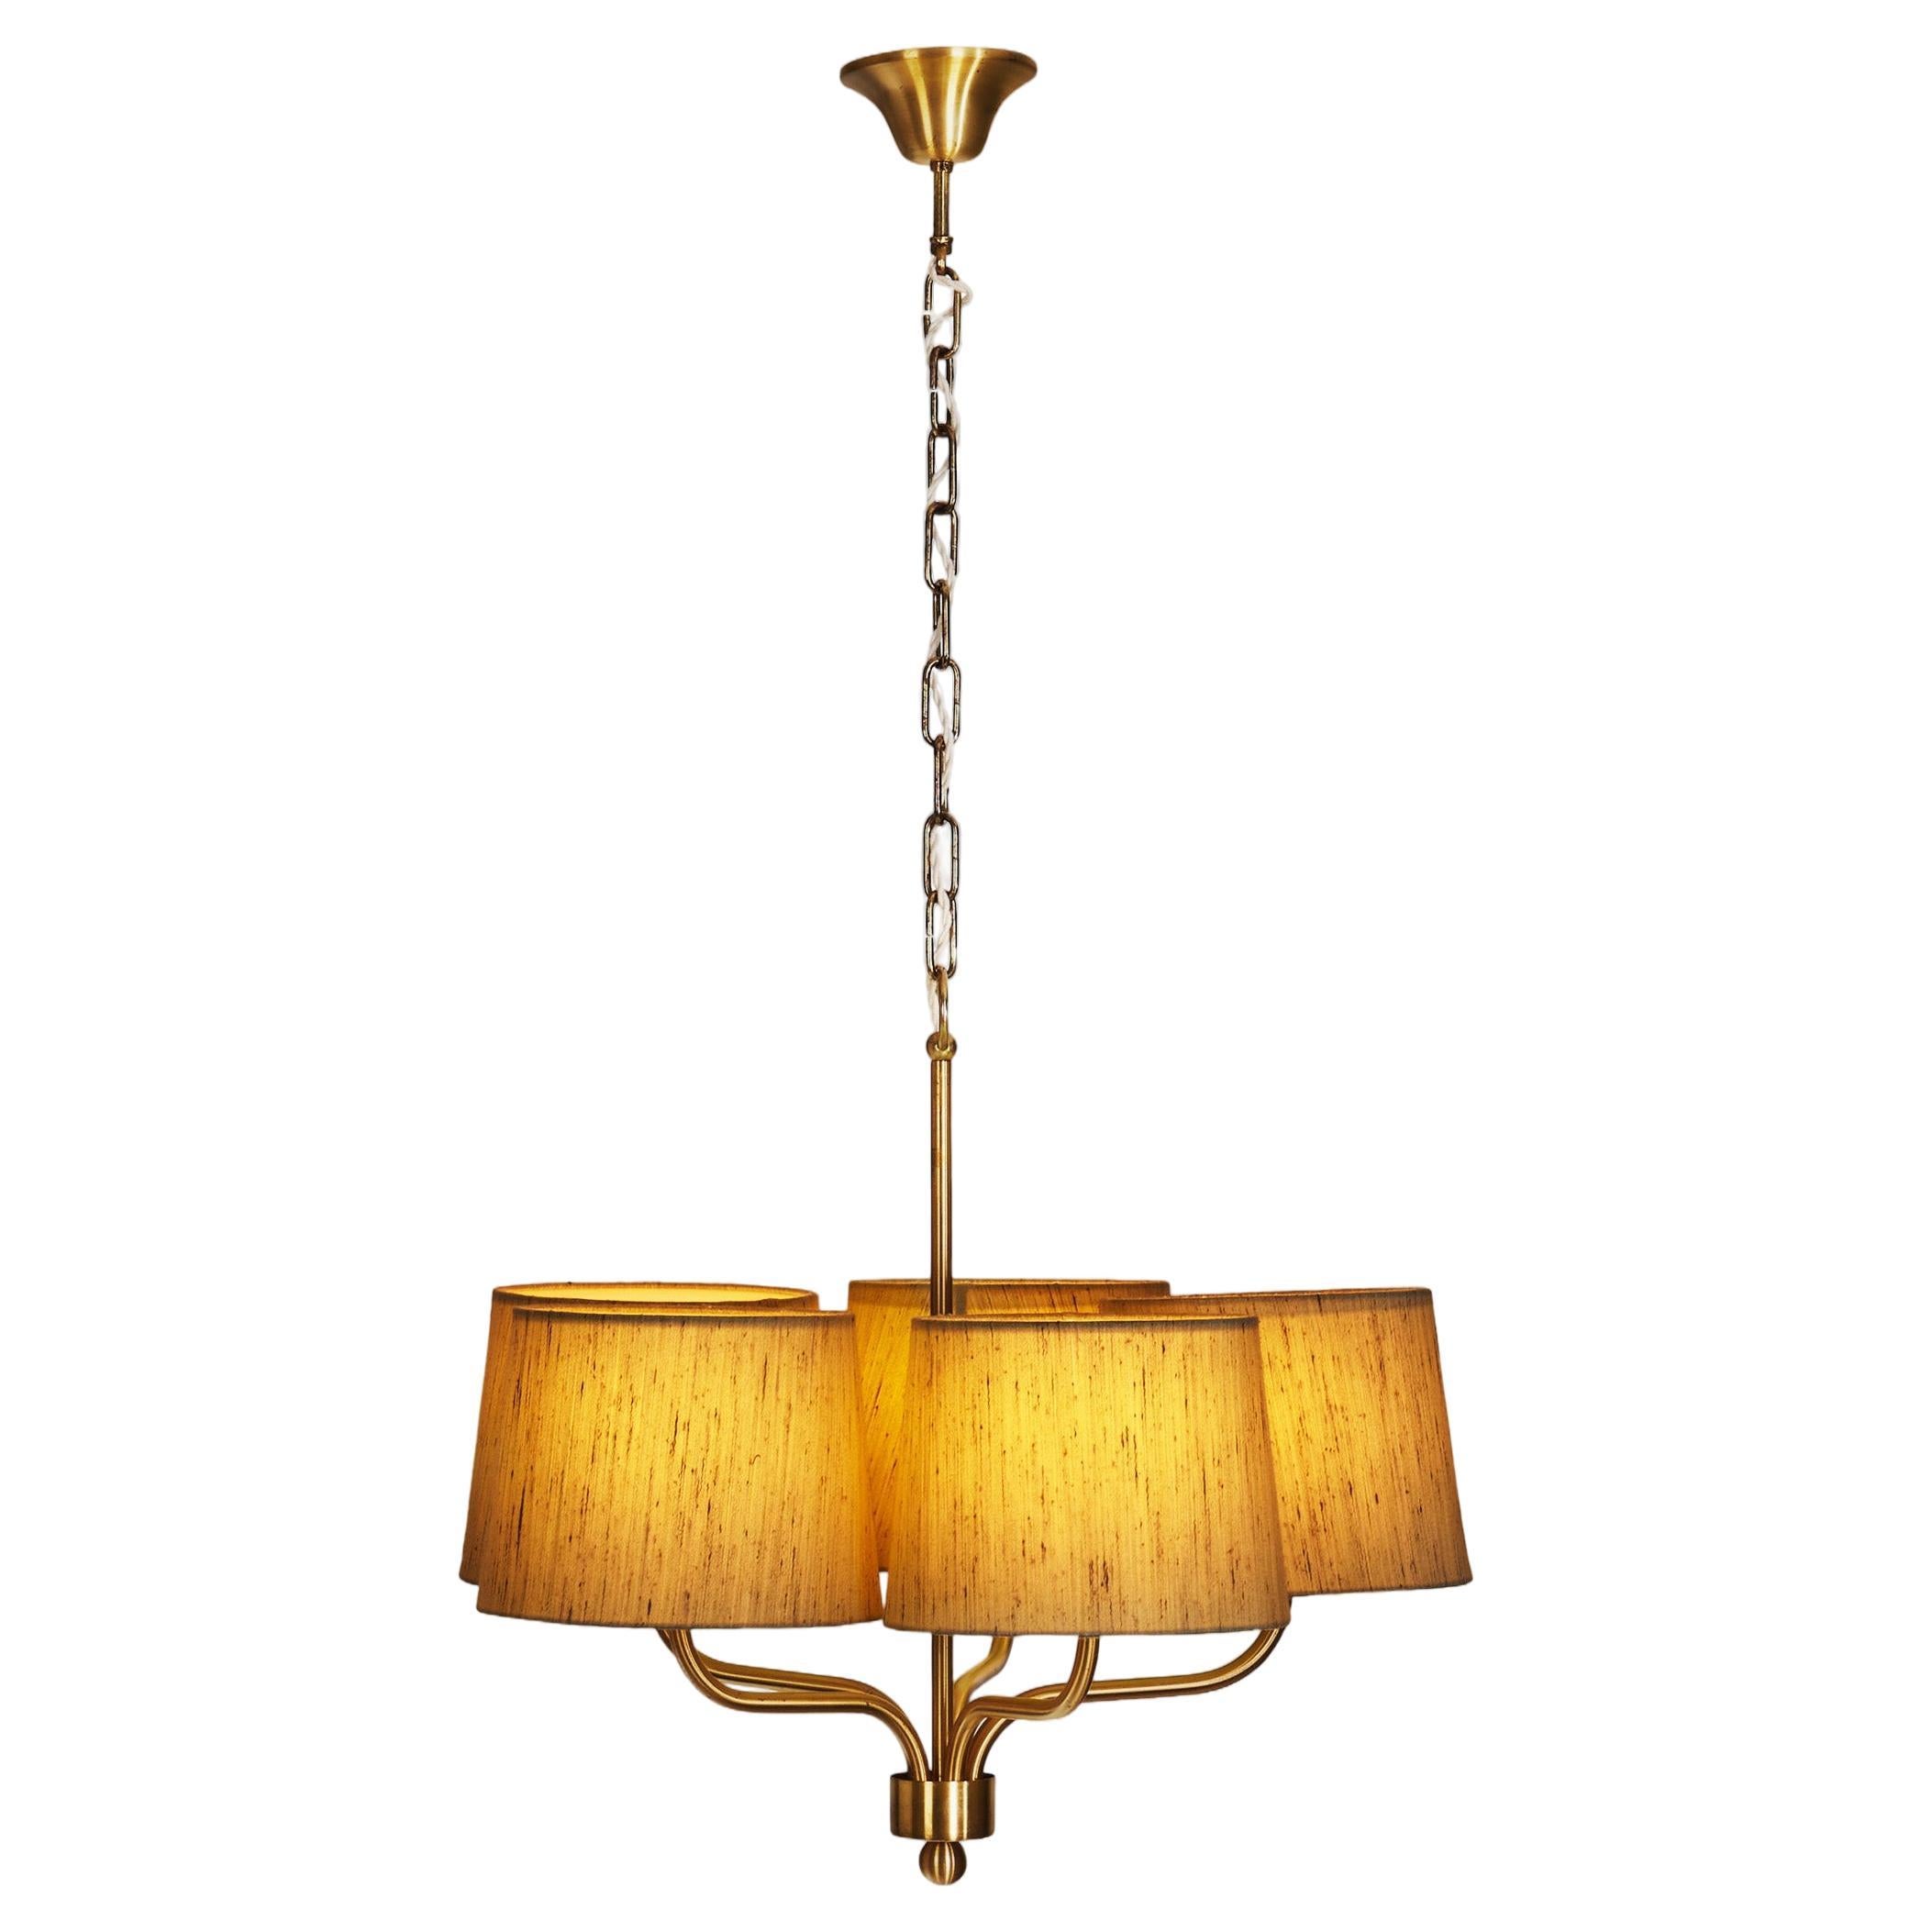 Five Arm Brass Ceiling Lamp with Fabric Shades by Luxus Vittsjö, Sweden 1960s For Sale